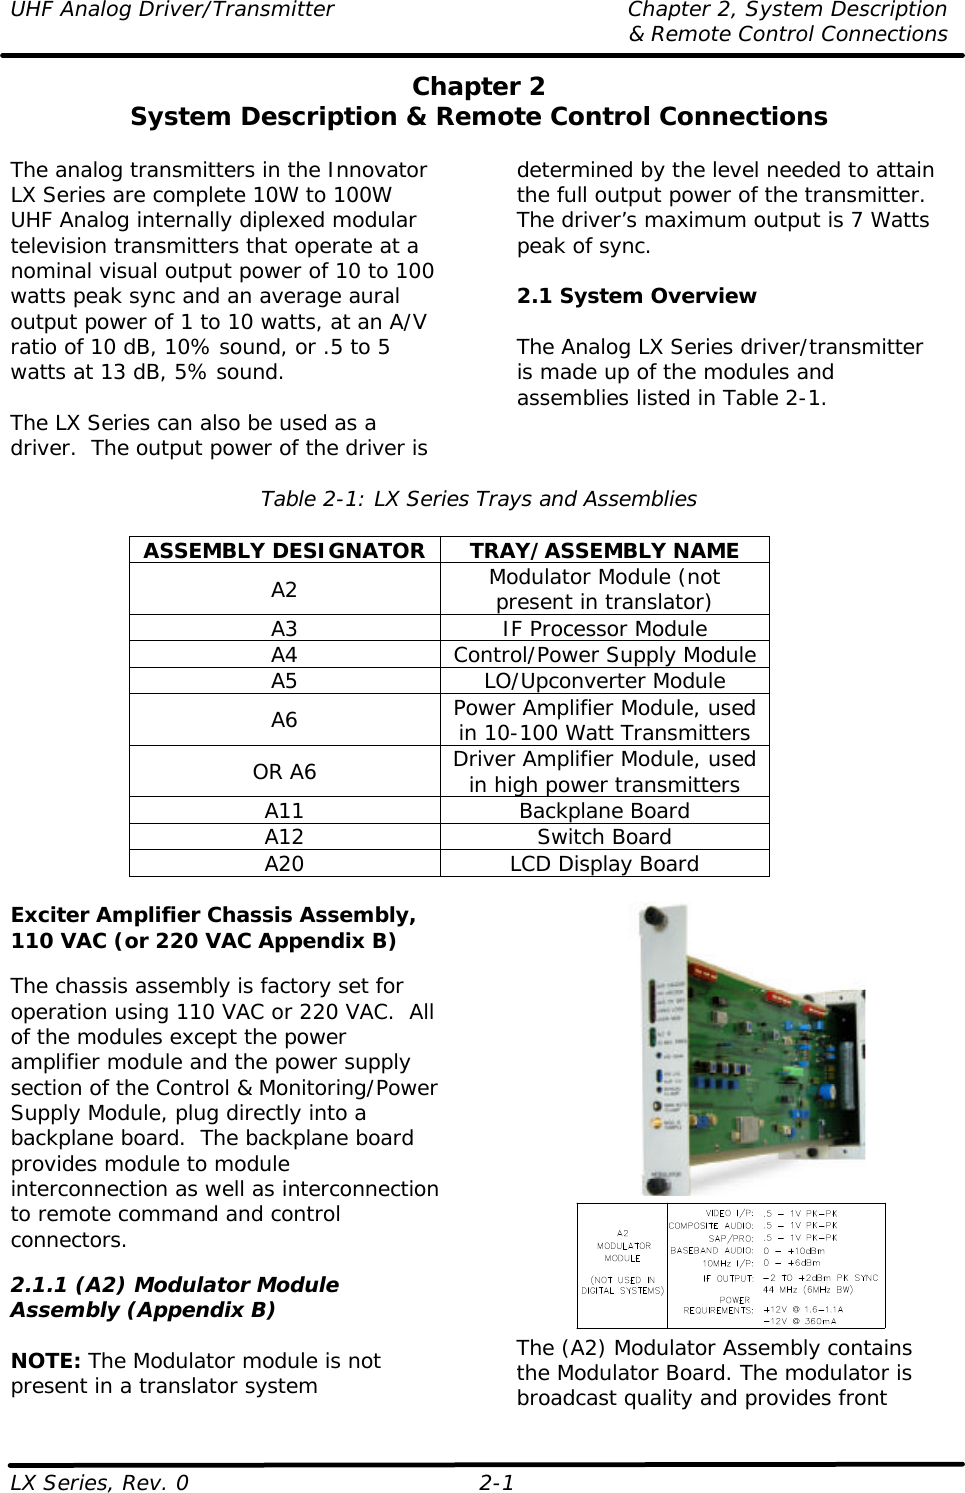 UHF Analog Driver/Transmitter Chapter 2, System Description  &amp; Remote Control Connections LX Series, Rev. 0 2-1 Chapter 2 System Description &amp; Remote Control Connections  The analog transmitters in the Innovator LX Series are complete 10W to 100W UHF Analog internally diplexed modular television transmitters that operate at a nominal visual output power of 10 to 100 watts peak sync and an average aural output power of 1 to 10 watts, at an A/V ratio of 10 dB, 10% sound, or .5 to 5 watts at 13 dB, 5% sound.  The LX Series can also be used as a driver.  The output power of the driver is determined by the level needed to attain the full output power of the transmitter. The driver’s maximum output is 7 Watts peak of sync.  2.1 System Overview  The Analog LX Series driver/transmitter is made up of the modules and assemblies listed in Table 2-1.  Table 2-1: LX Series Trays and Assemblies  ASSEMBLY DESIGNATOR TRAY/ASSEMBLY NAME A2 Modulator Module (not present in translator) A3 IF Processor Module A4 Control/Power Supply Module A5 LO/Upconverter Module A6 Power Amplifier Module, used in 10-100 Watt Transmitters OR A6 Driver Amplifier Module, used in high power transmitters A11 Backplane Board A12 Switch Board A20 LCD Display Board  Exciter Amplifier Chassis Assembly, 110 VAC (or 220 VAC Appendix B)  The chassis assembly is factory set for operation using 110 VAC or 220 VAC.  All of the modules except the power amplifier module and the power supply section of the Control &amp; Monitoring/Power Supply Module, plug directly into a backplane board.  The backplane board provides module to module interconnection as well as interconnection to remote command and control connectors.  2.1.1 (A2) Modulator Module Assembly (Appendix B)  NOTE: The Modulator module is not present in a translator system   The (A2) Modulator Assembly contains the Modulator Board. The modulator is broadcast quality and provides front 